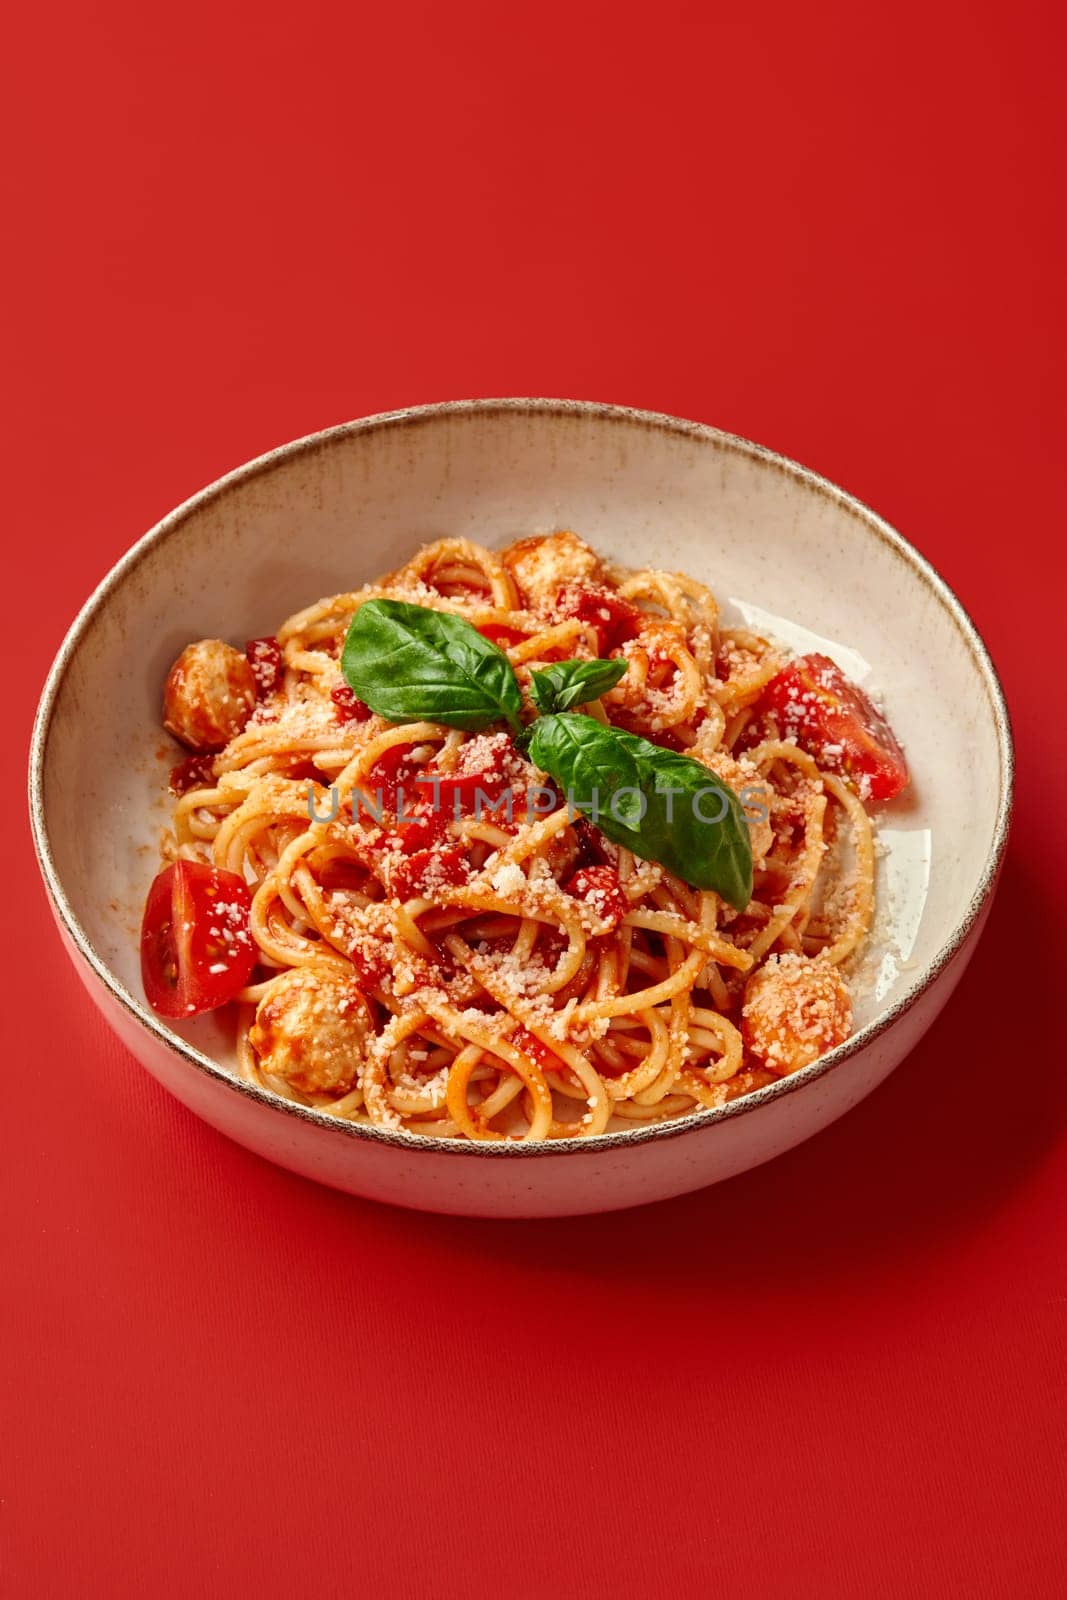 Appetizing spaghetti bowl with spicy tomato sauce and meatballs sprinkled with grated Parmesan cheese topped with fresh green basil leaves, served against vibrant red background